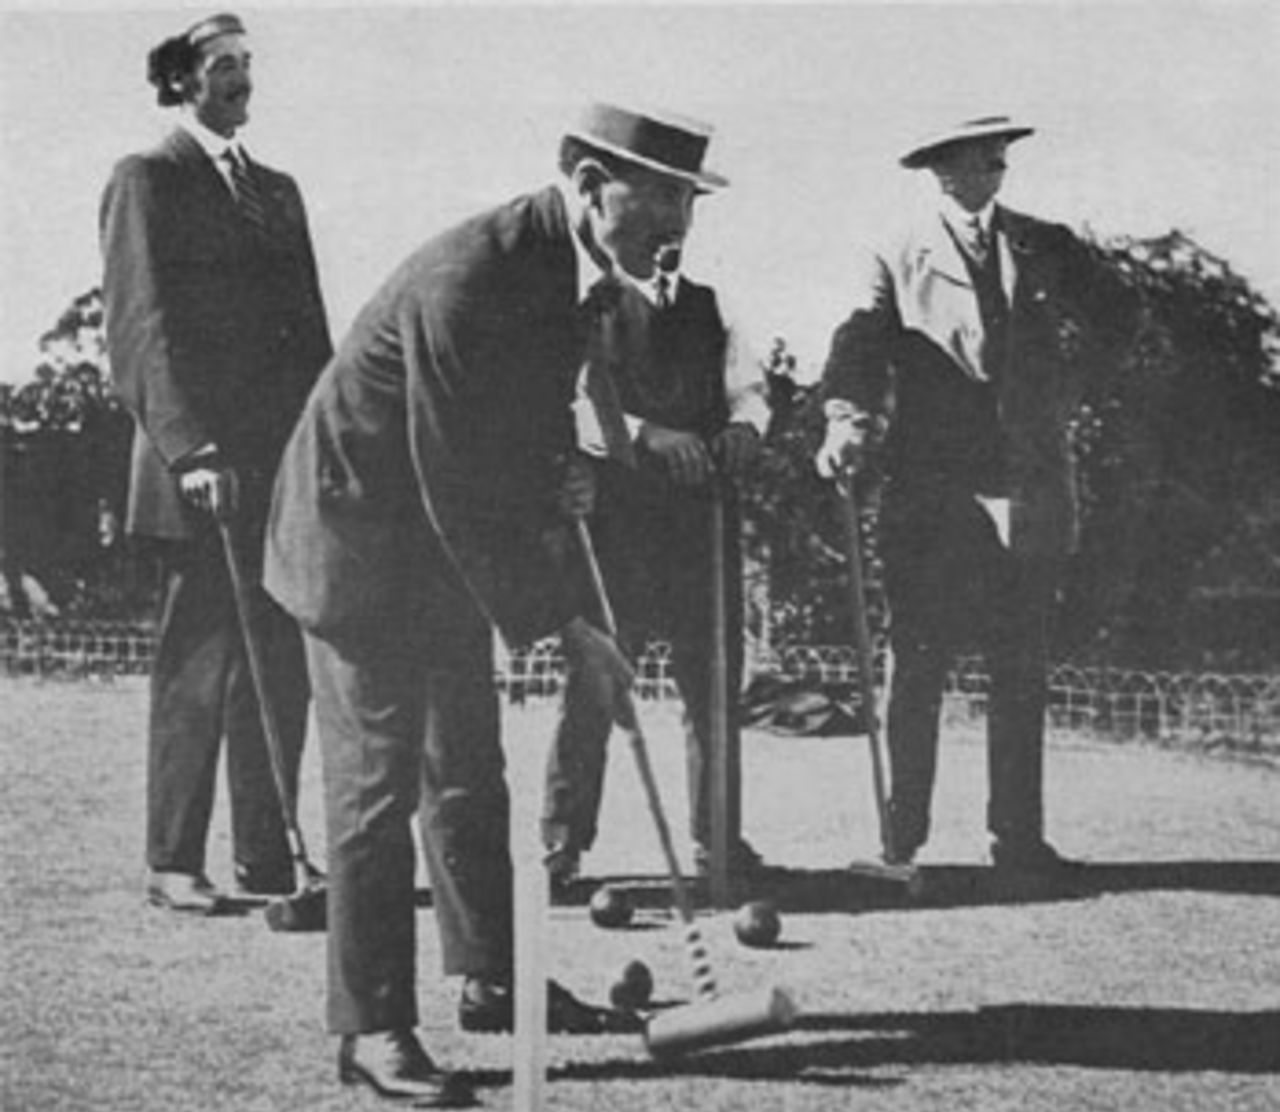 Frank Woolley, Wilfred Rhodes, Herbert Strudwick, and Albert Relf play croquet in South Africa, 1913-14